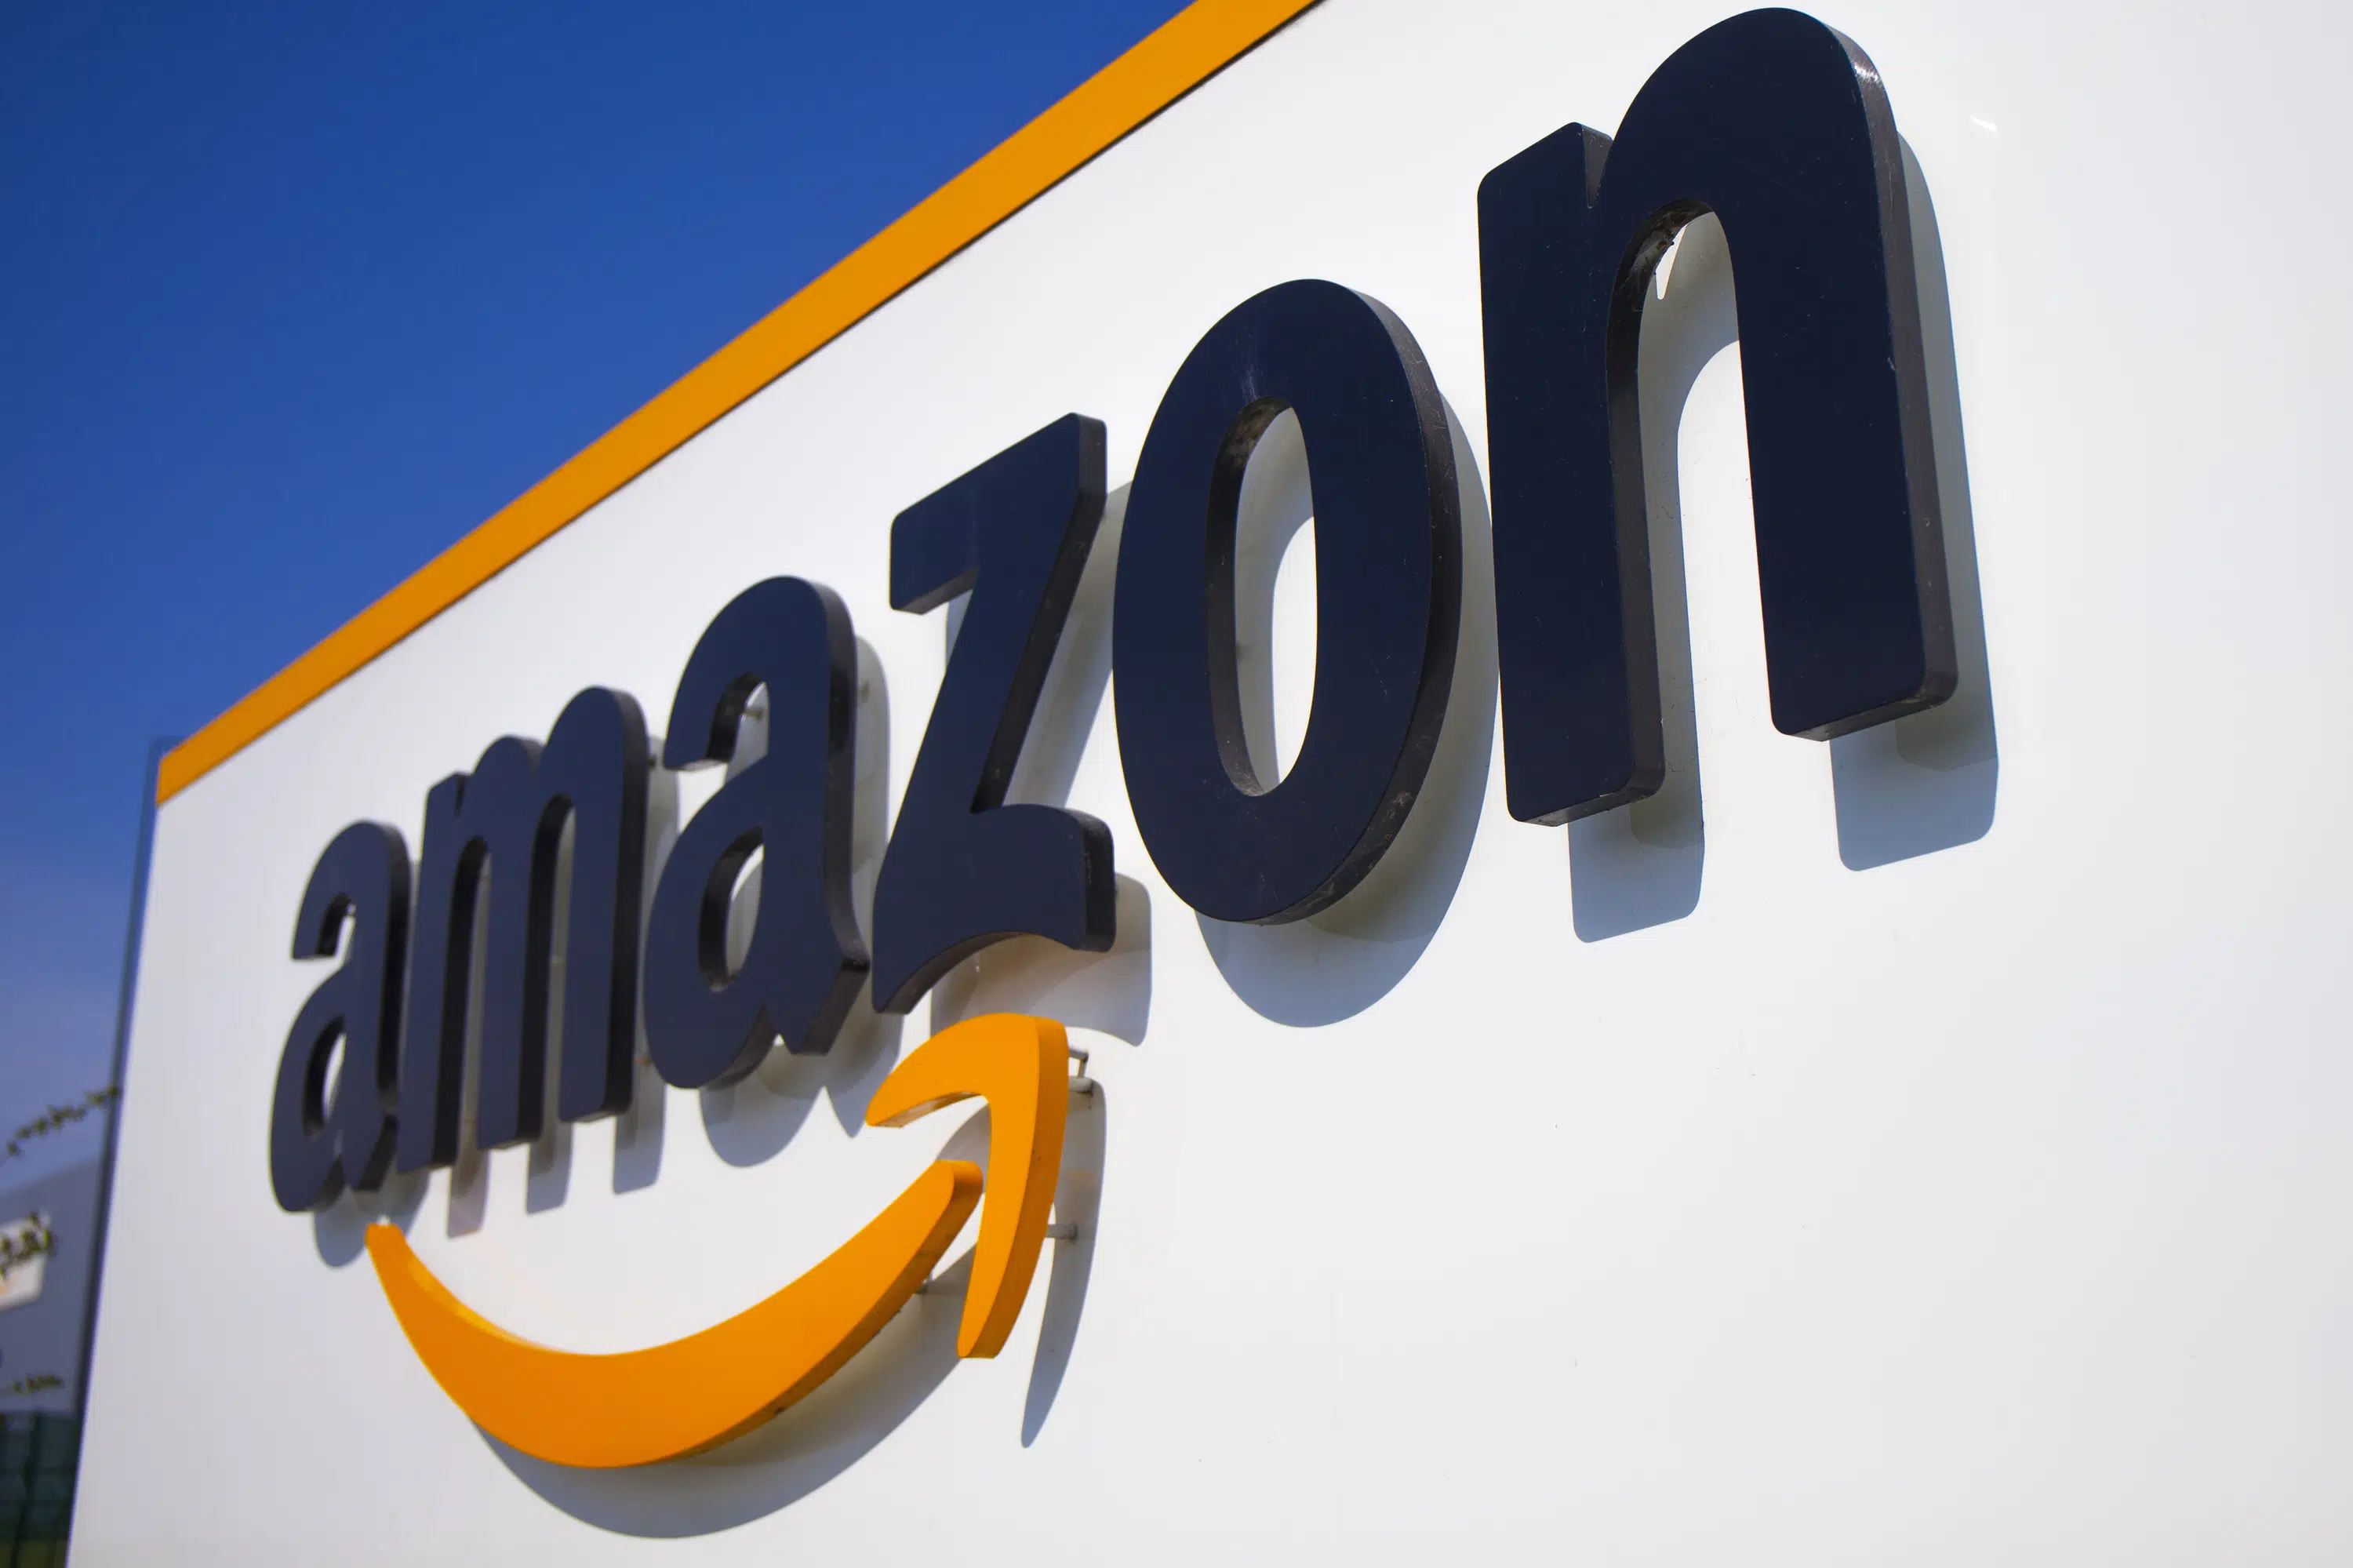 Amazon to make big business changes in EU settlement – The Associated Press